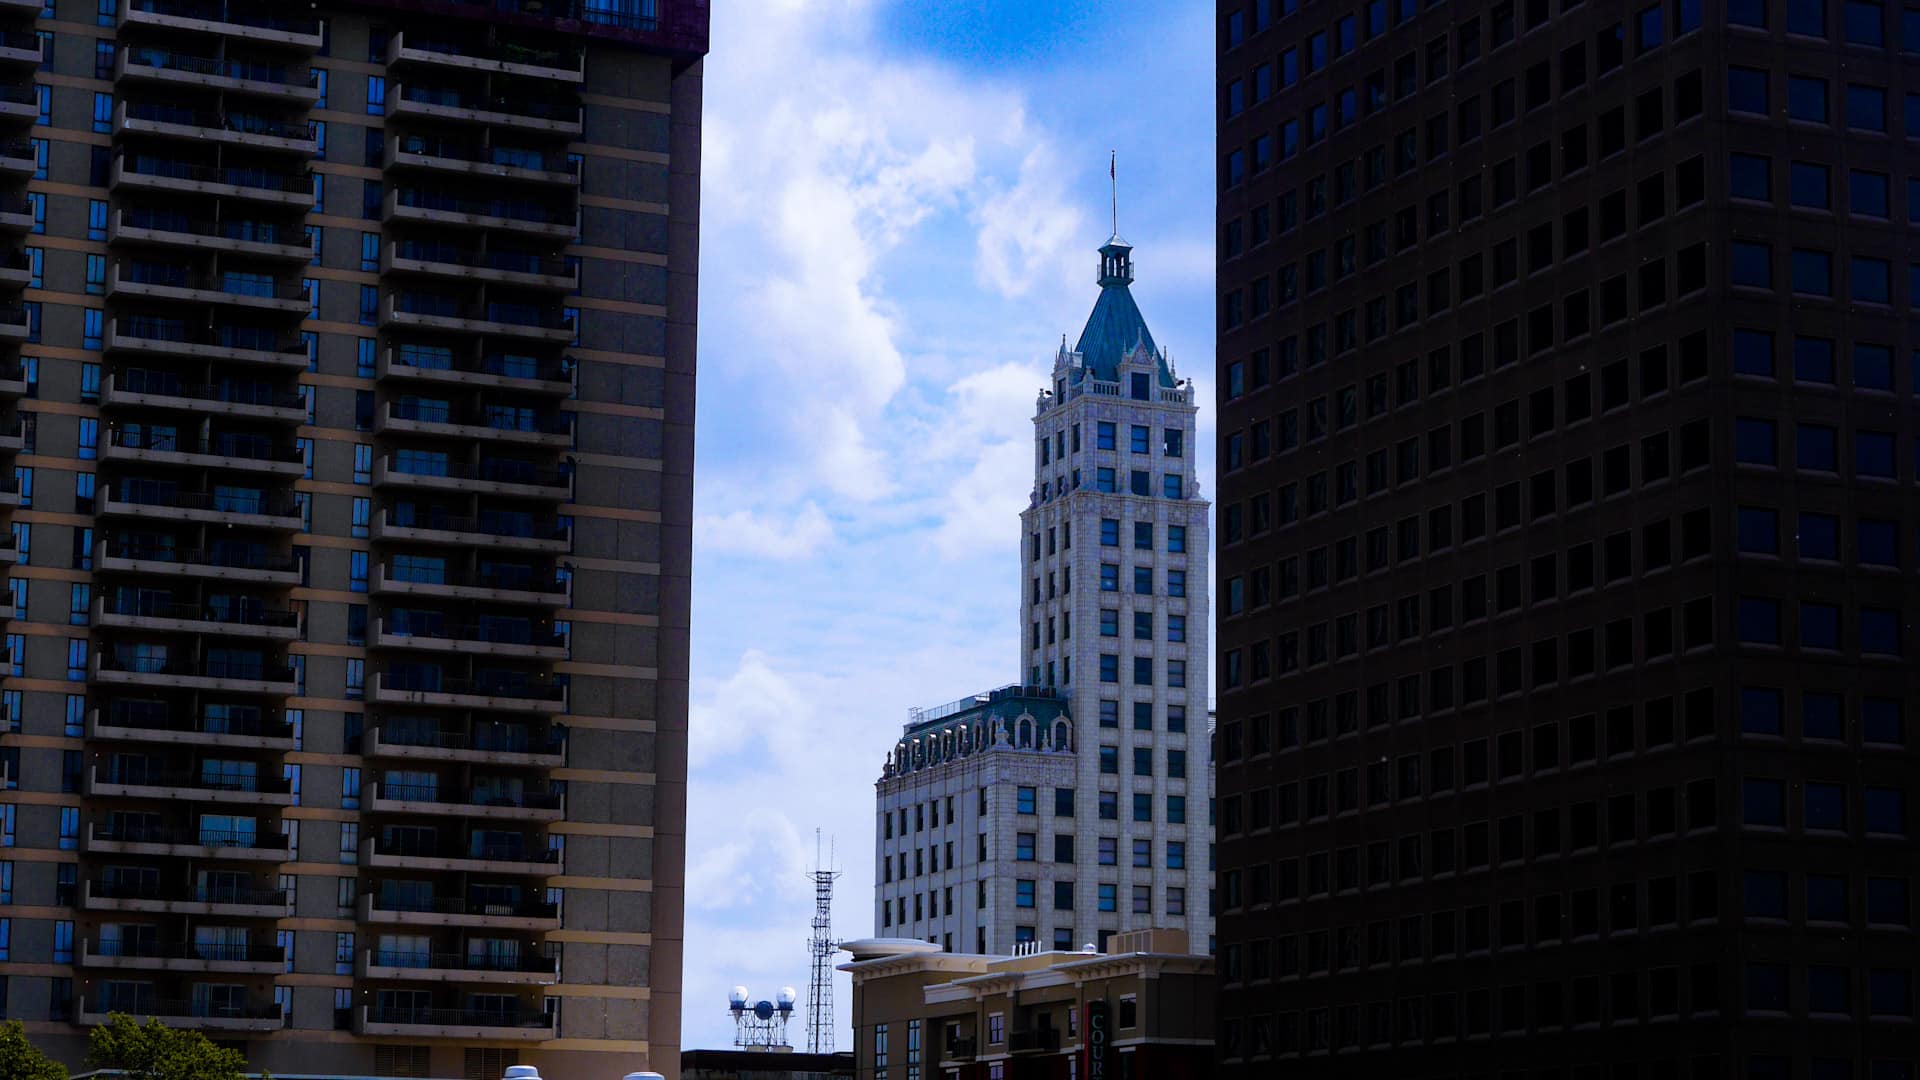 Thanks to its easy access to public transportation, dining options, and local events, Downtown is one of the best areas to stay in Memphis